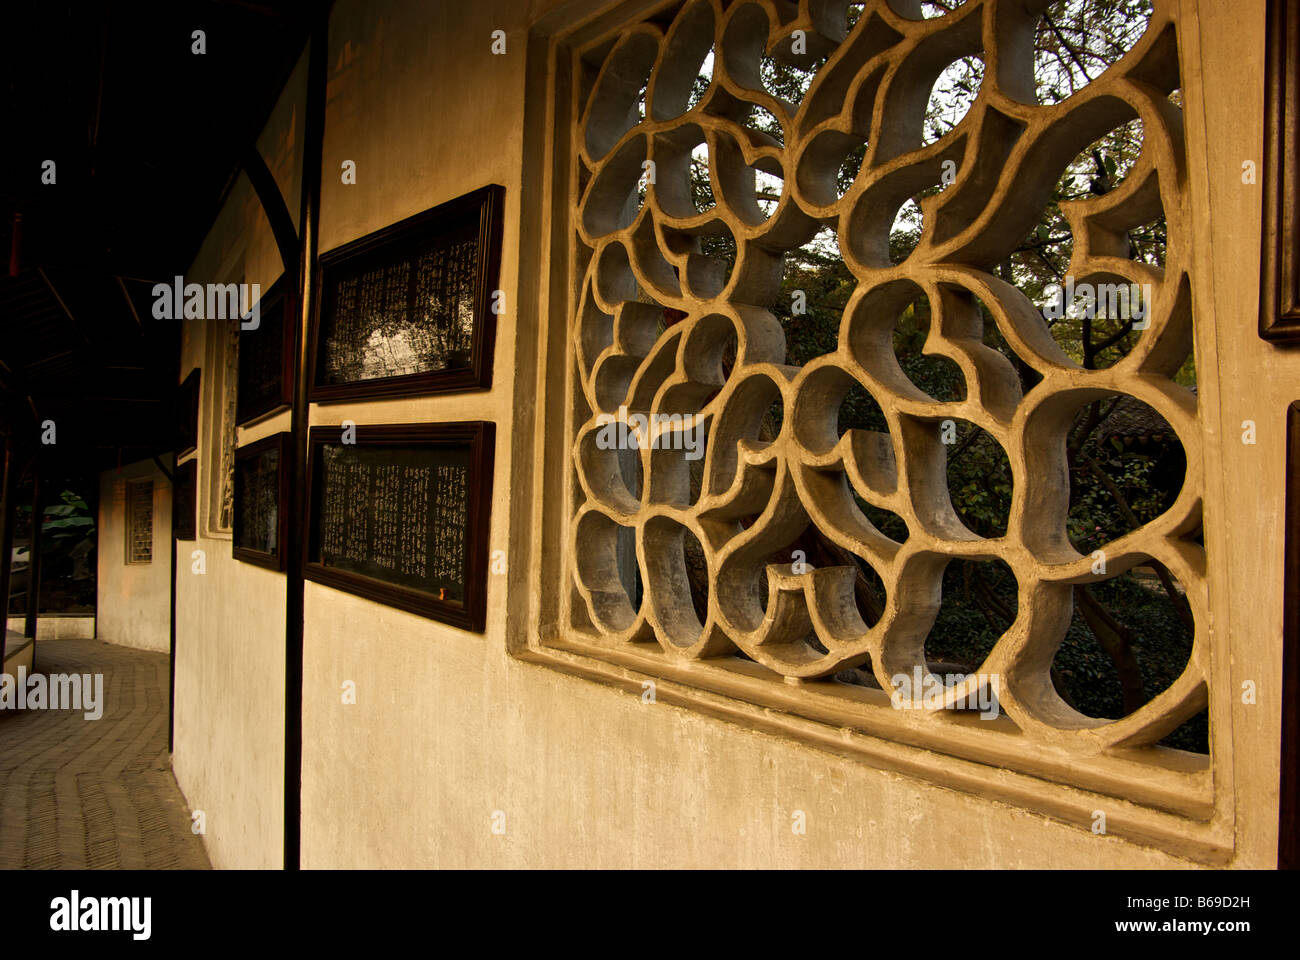 Framed Chinese writings and stone latticework window decoration Garden of the Humble Administrator from the Ming Dynasty Stock Photo